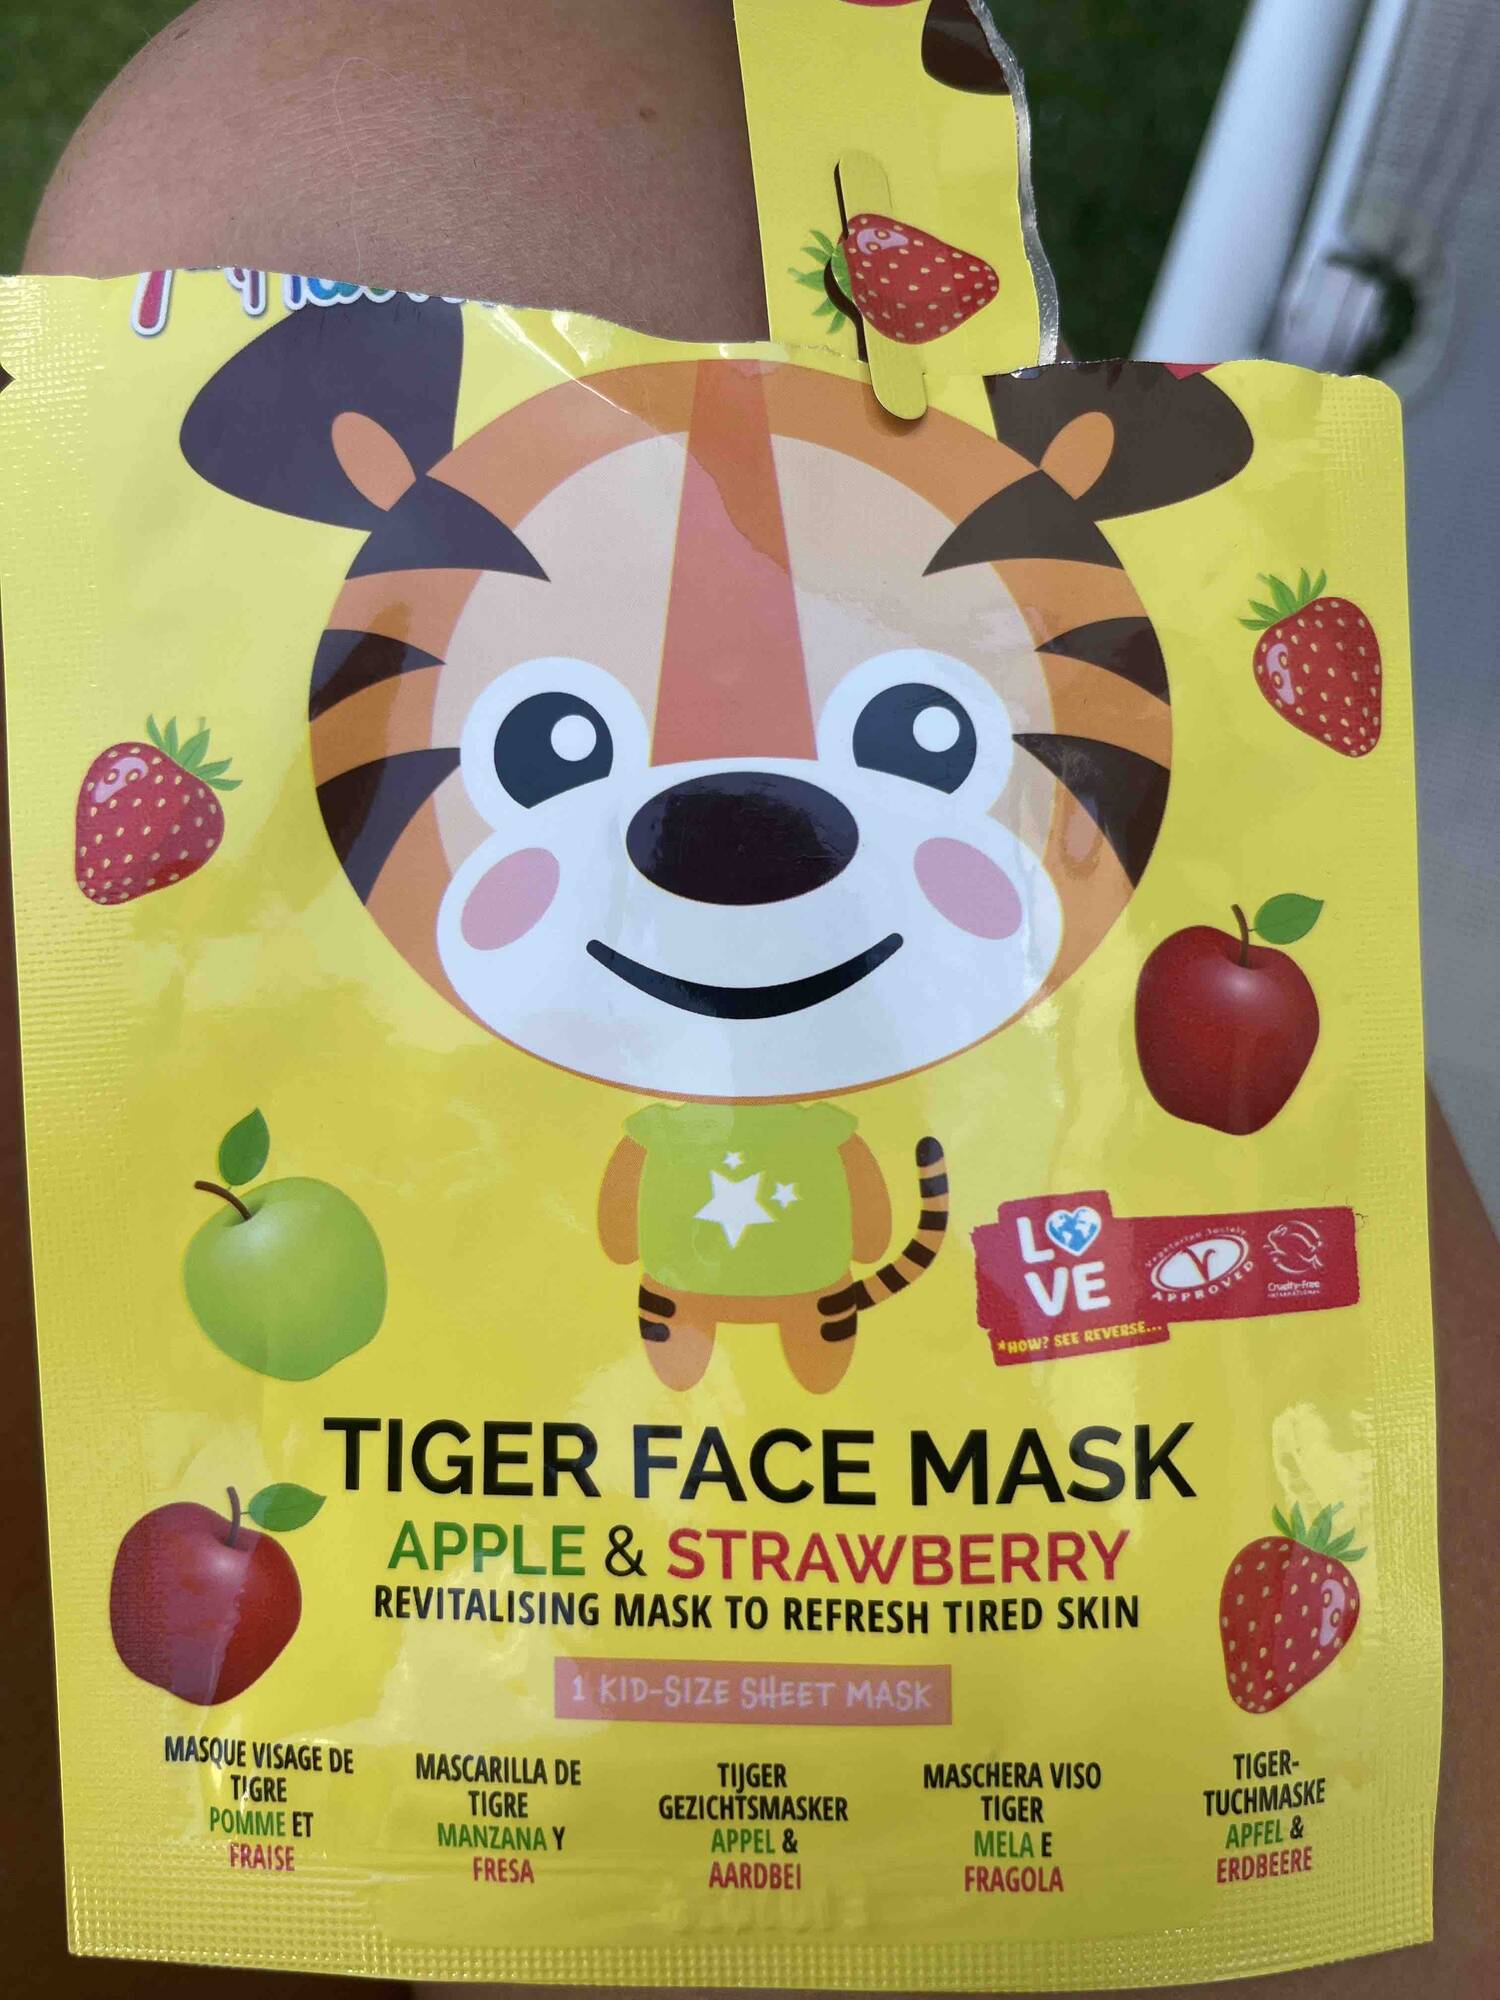 7TH HEAVEN - Apple & strawberry - Tiger face mask